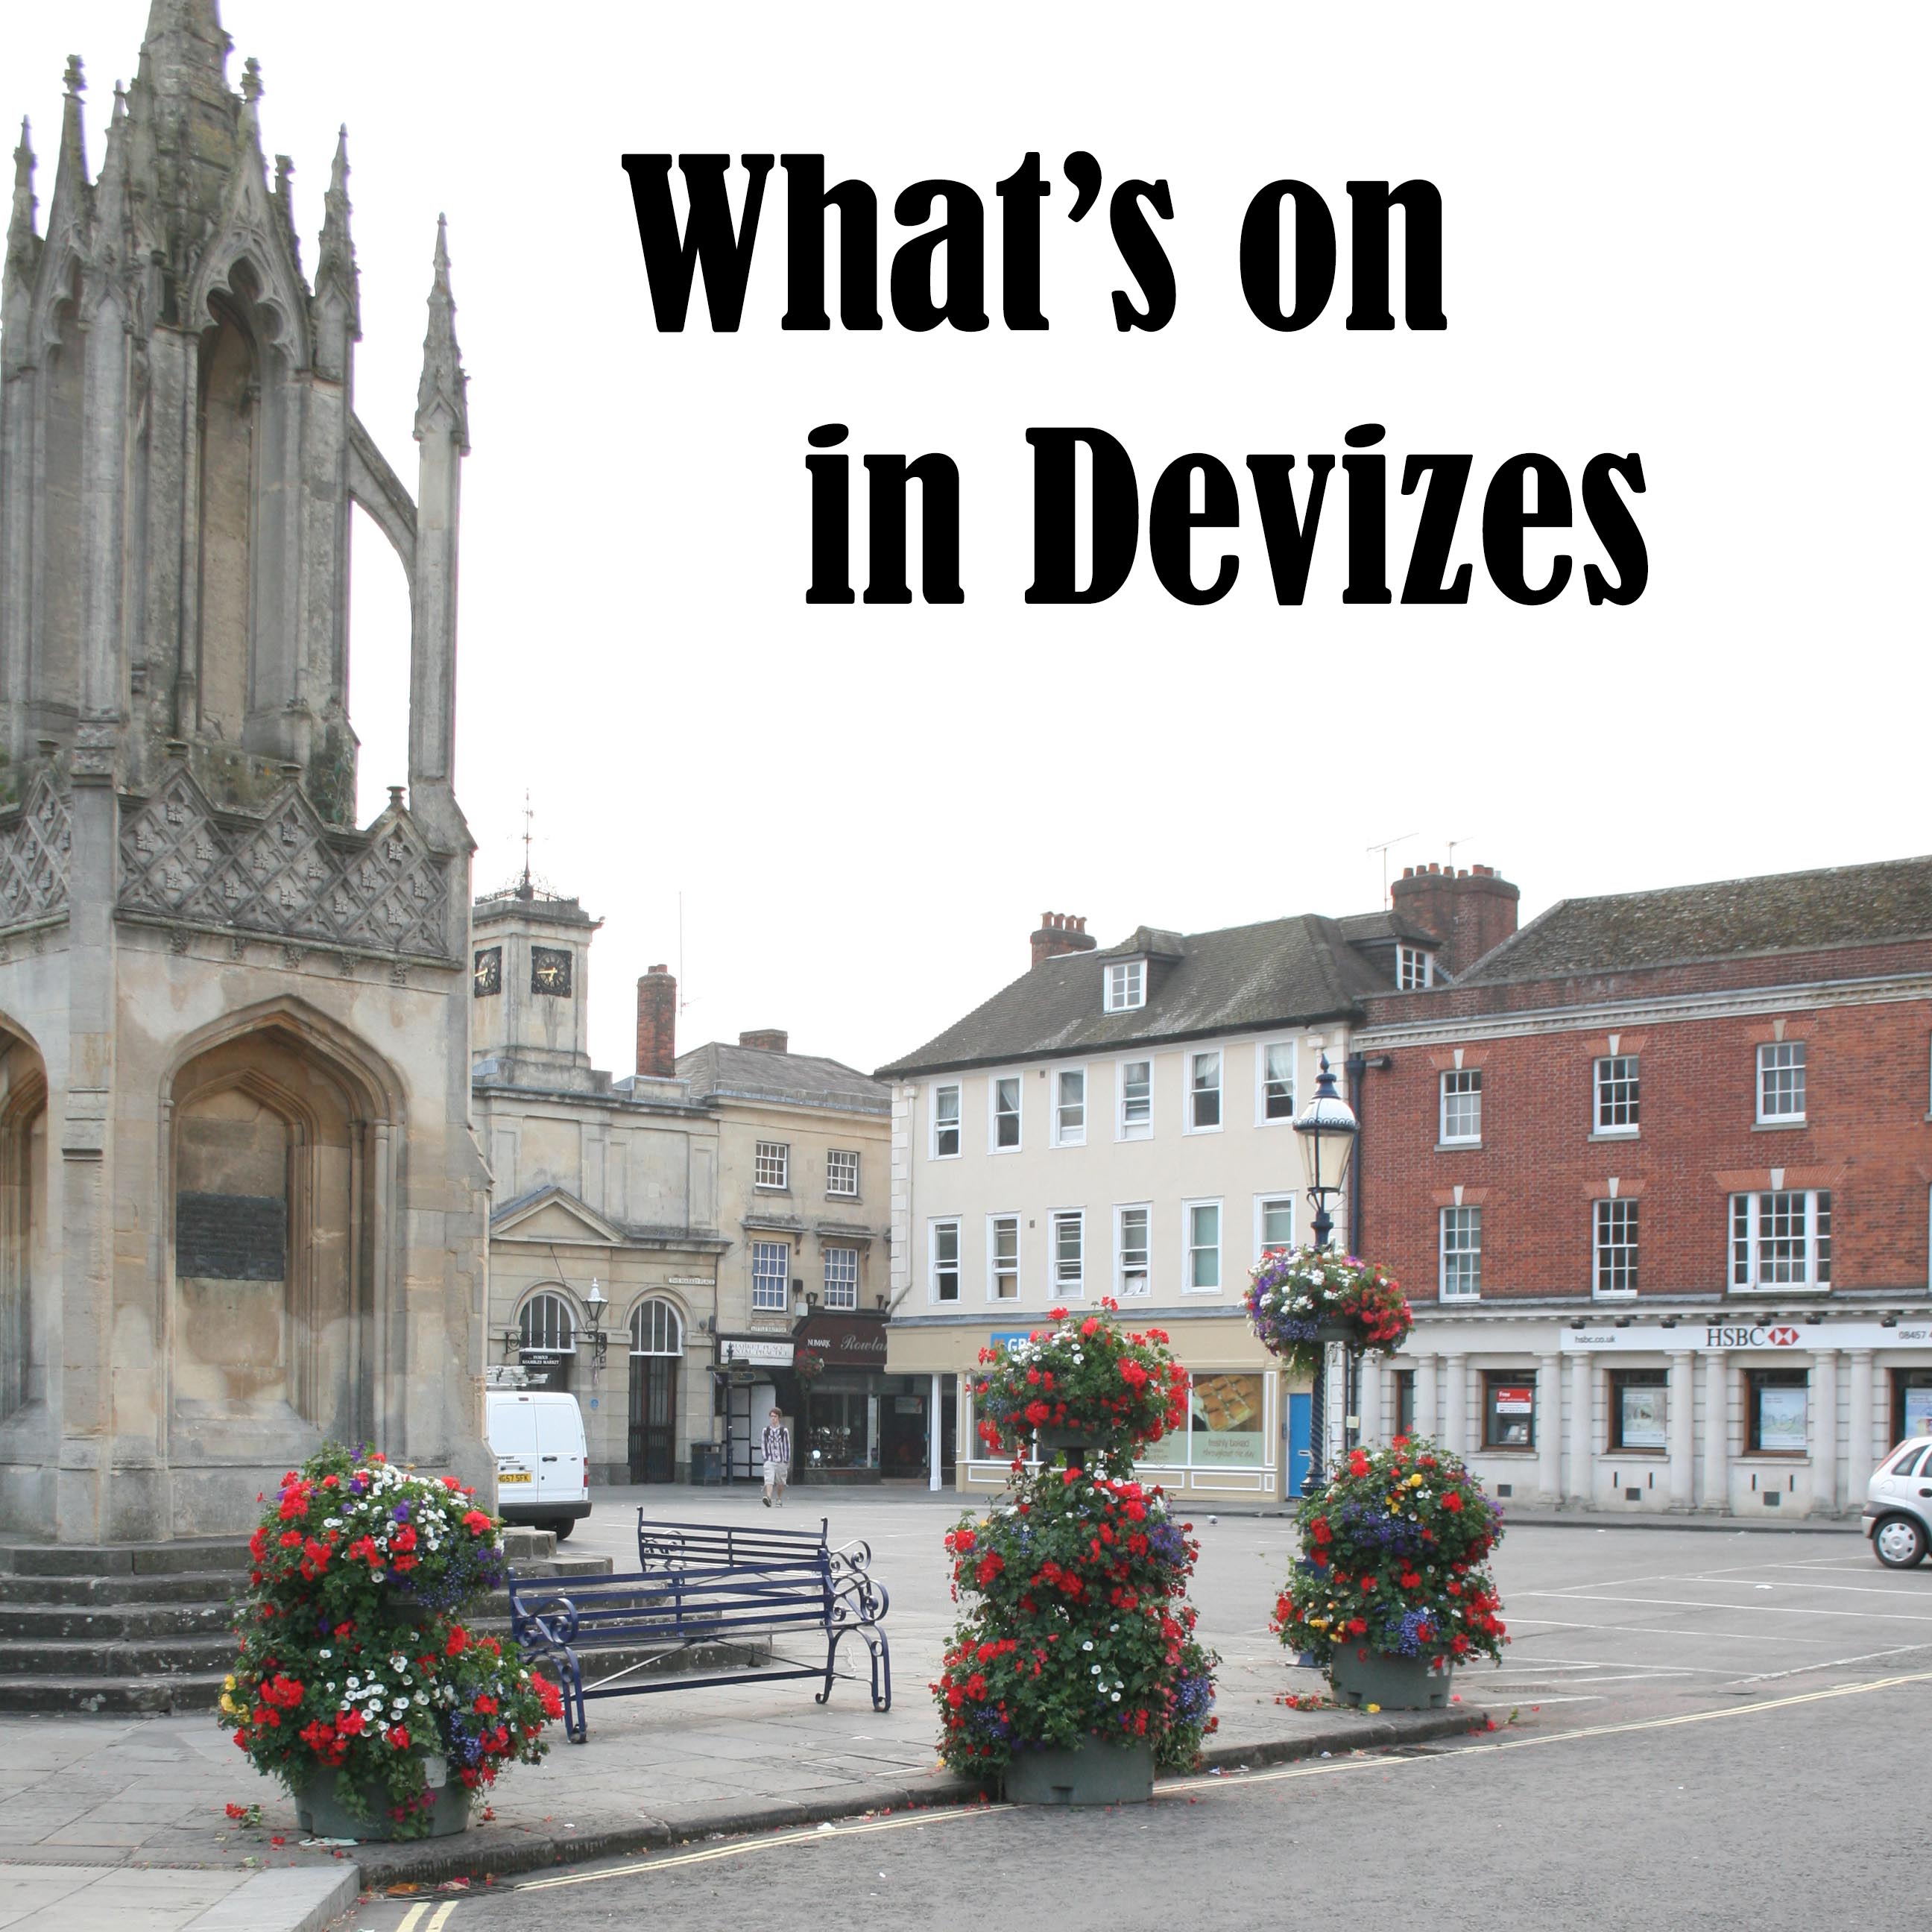 What's on in Devizes